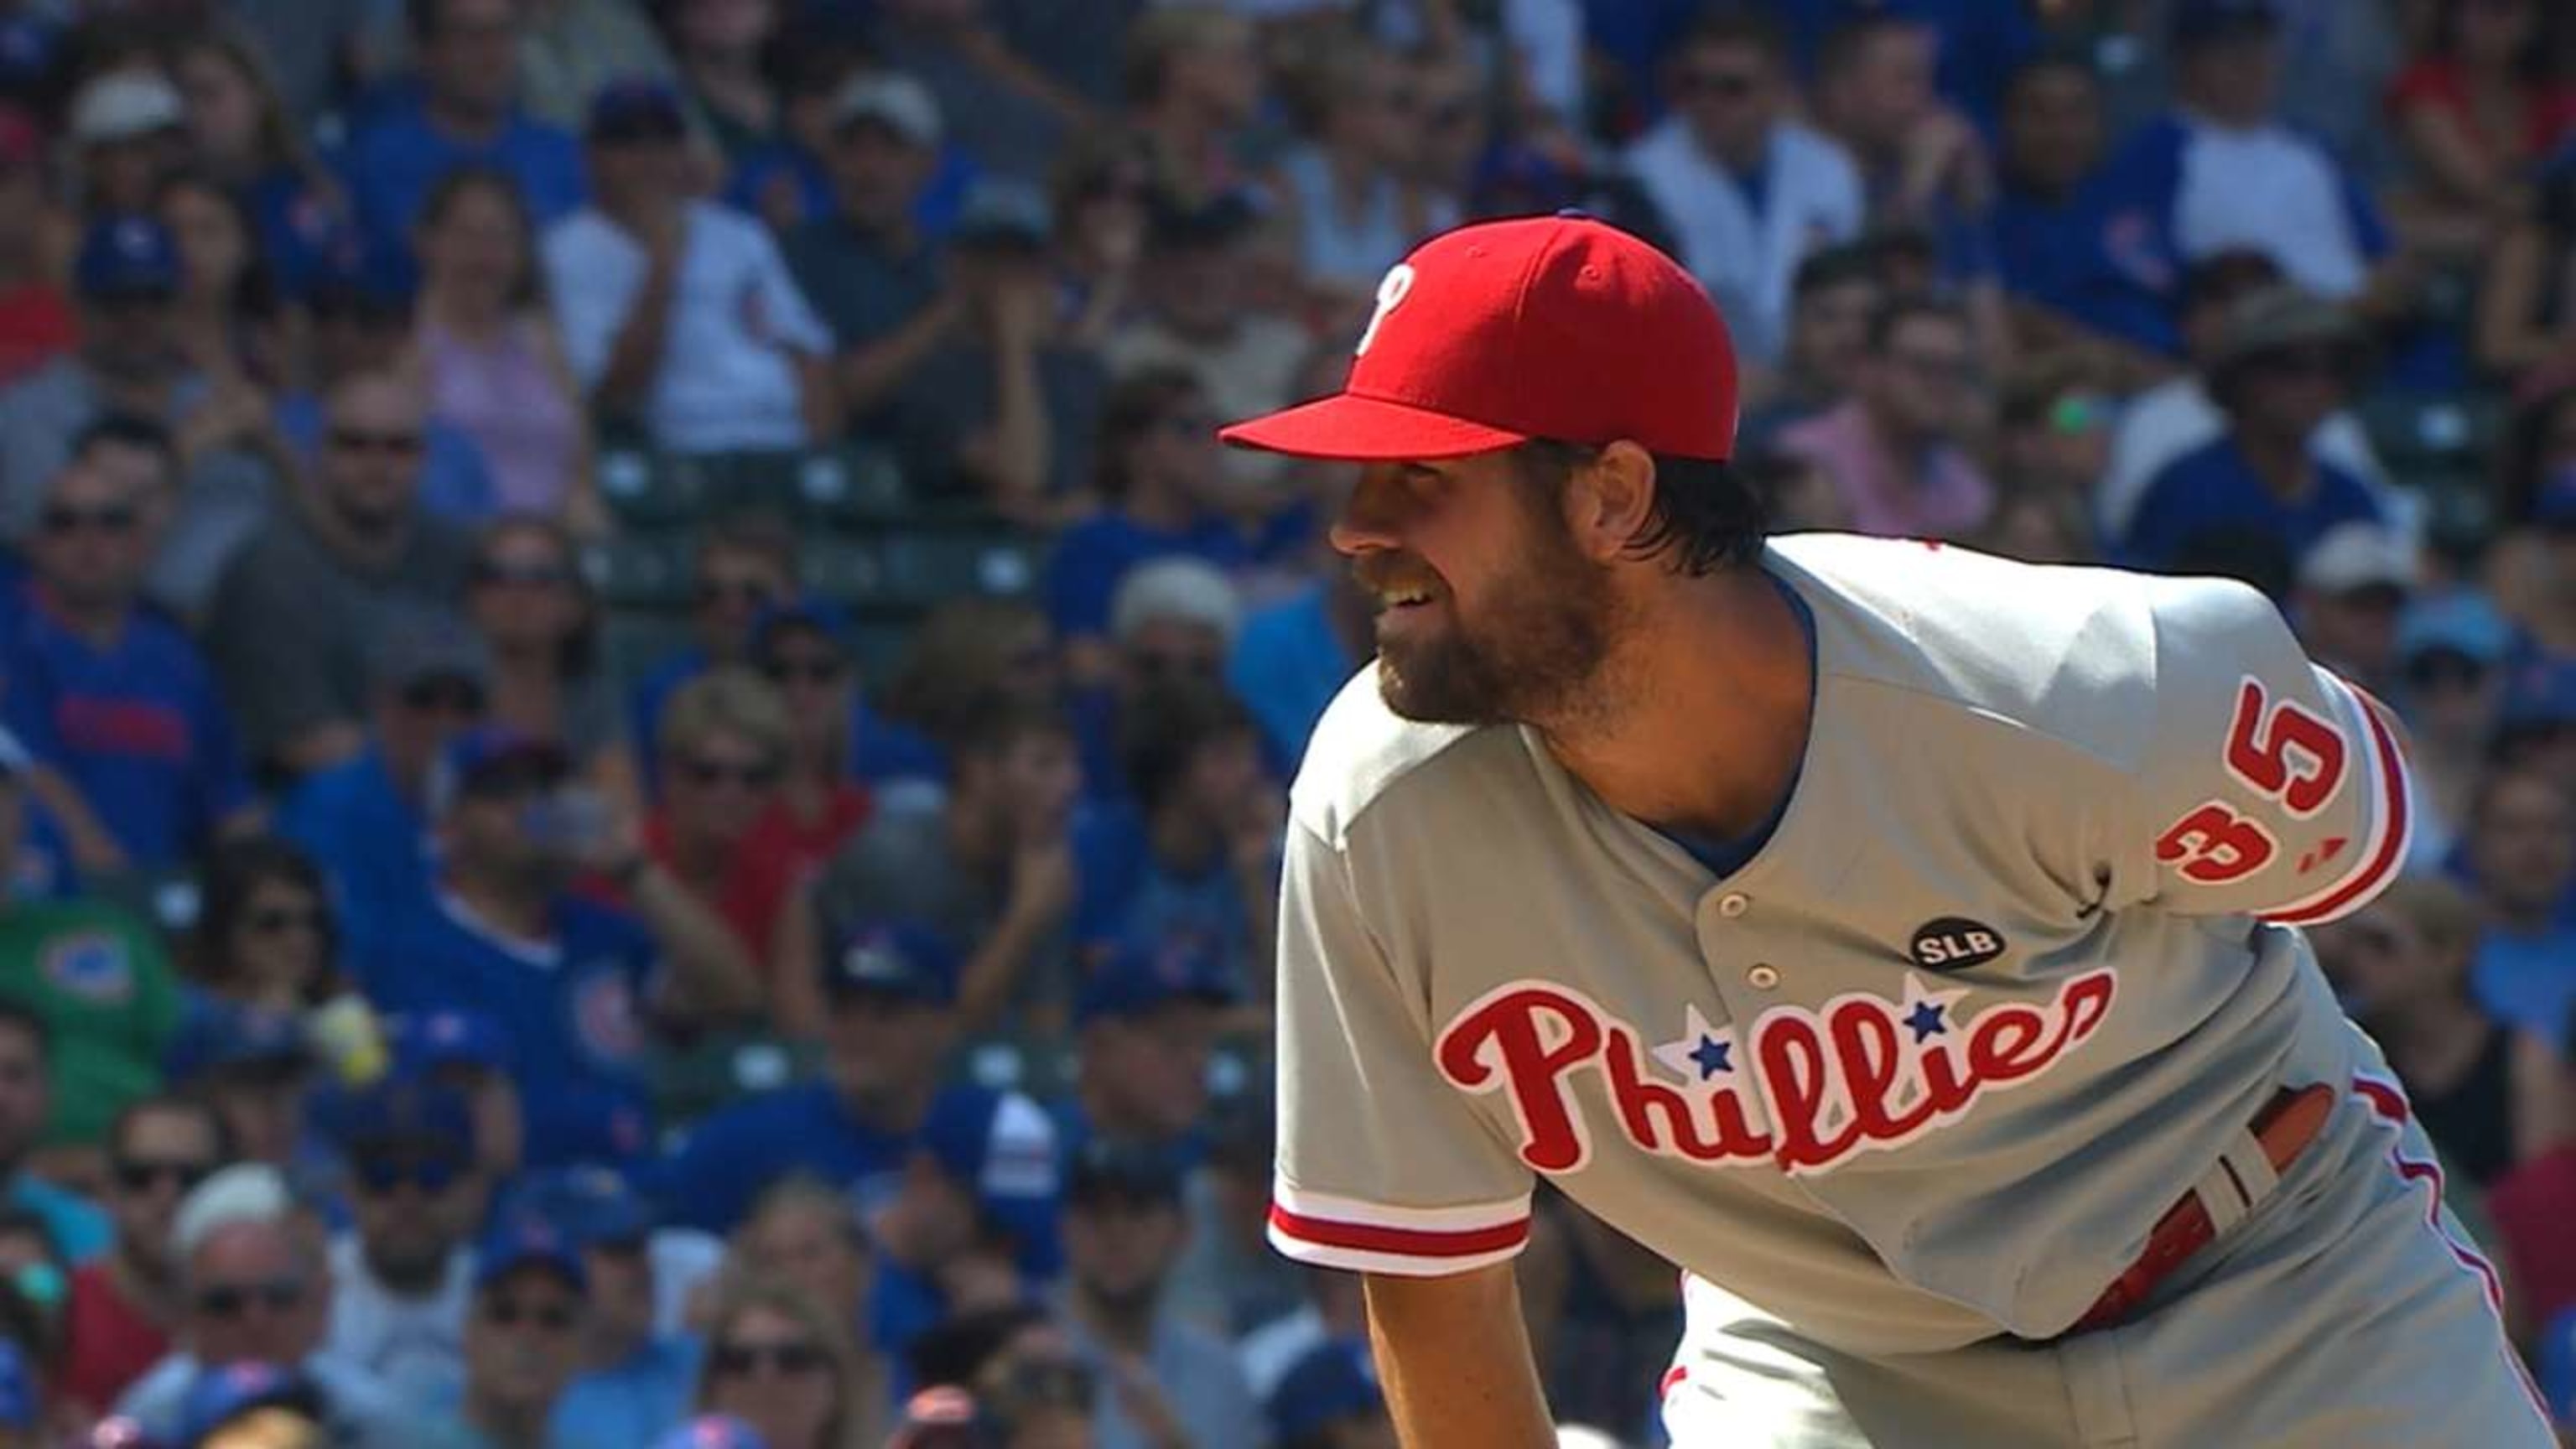 Rangers reportedly getting Cole Hamels - The Boston Globe